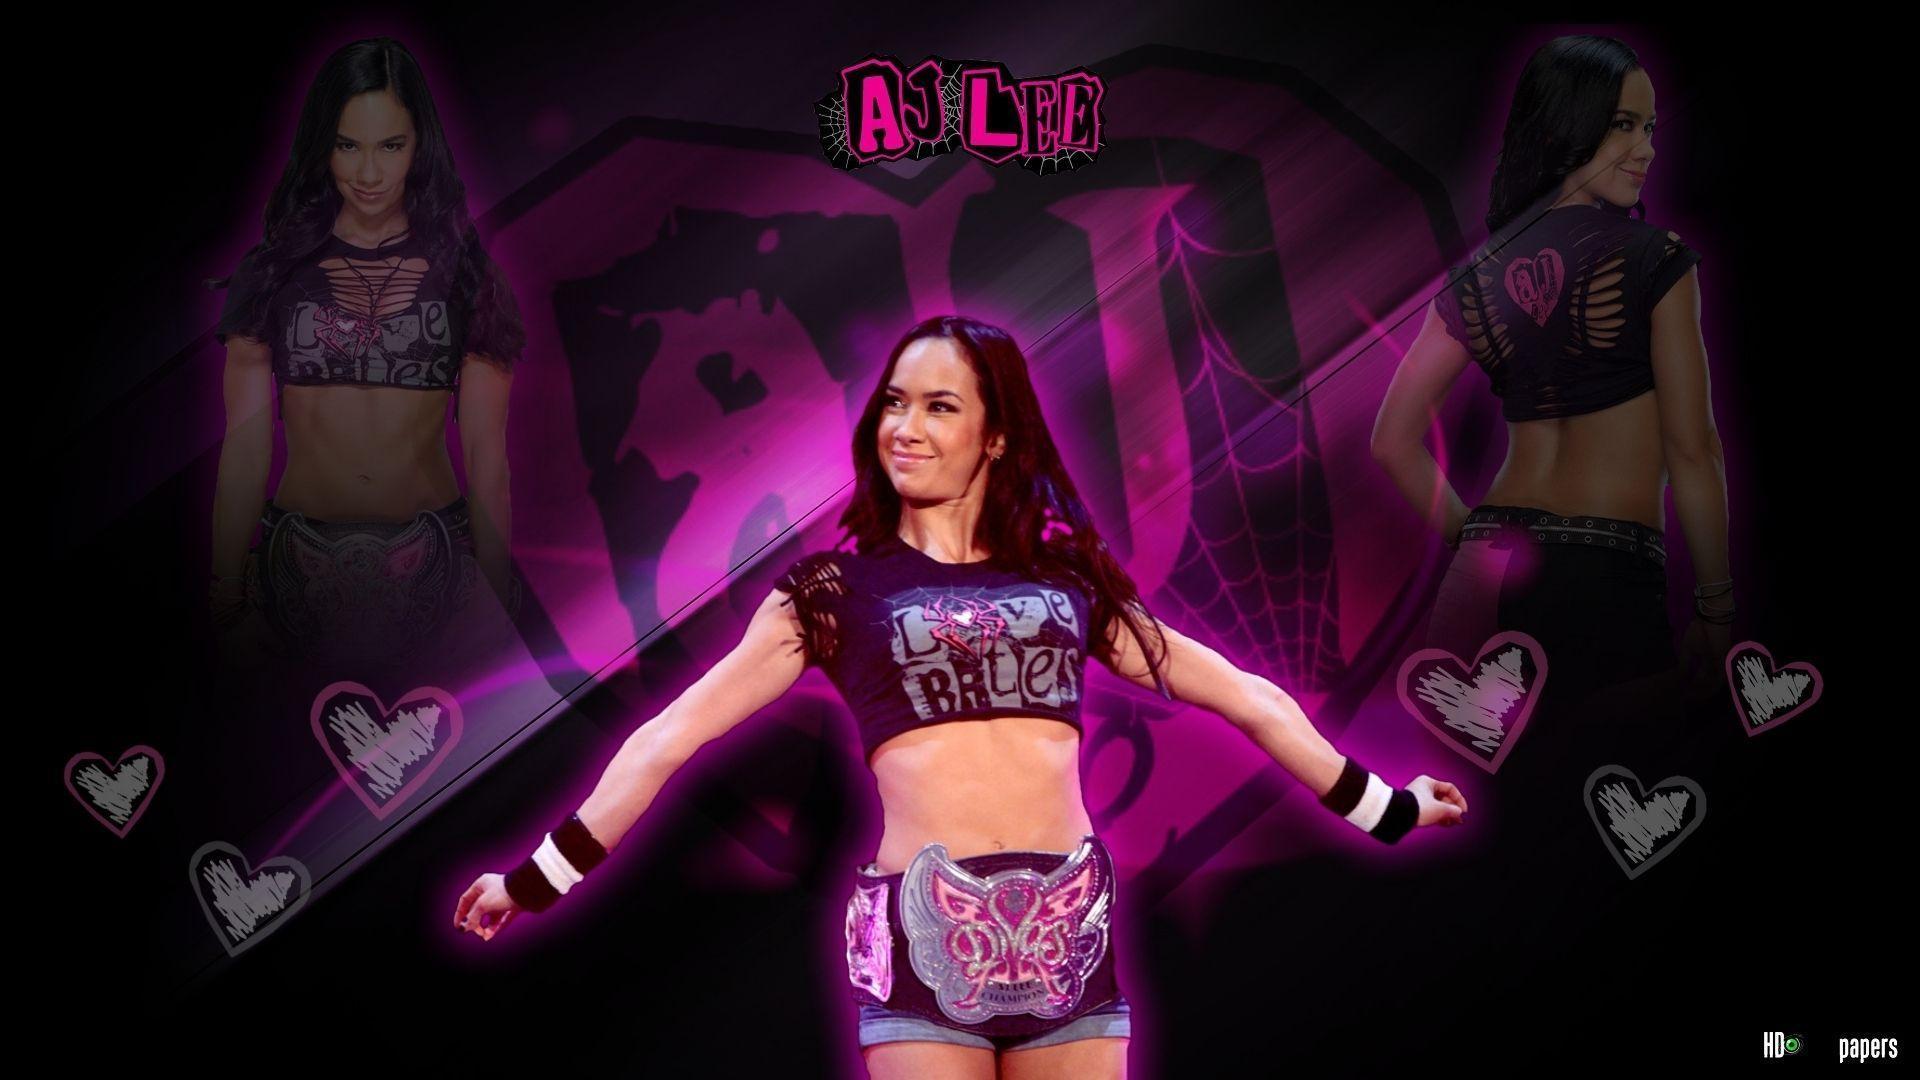 Sizes And You Can Download Aj Lee Wallpaper Very Easily And Set